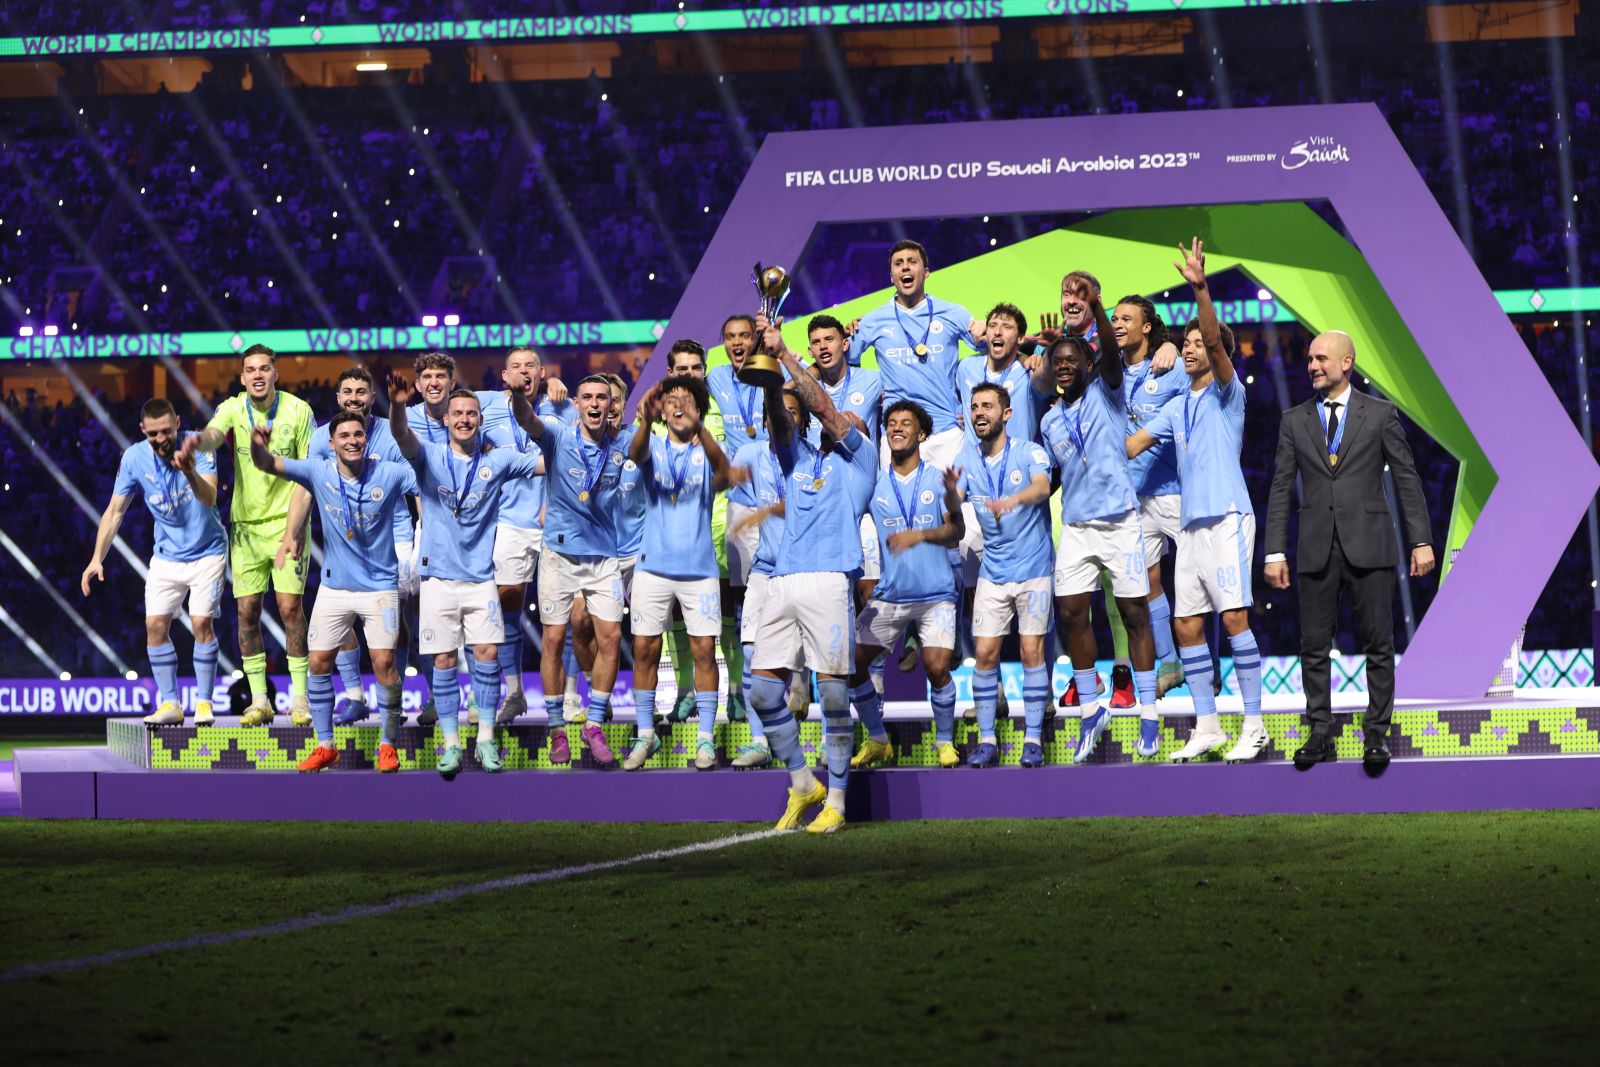 epa11041429 Player of Manchester City celebrate with the trophy after winning the FIFA Club World Cup 2023 final match beween Manchester City and Fluminense FC in Jeddah, Saudi Arabia, 22 December 2023.  EPA/ALI HAIDER